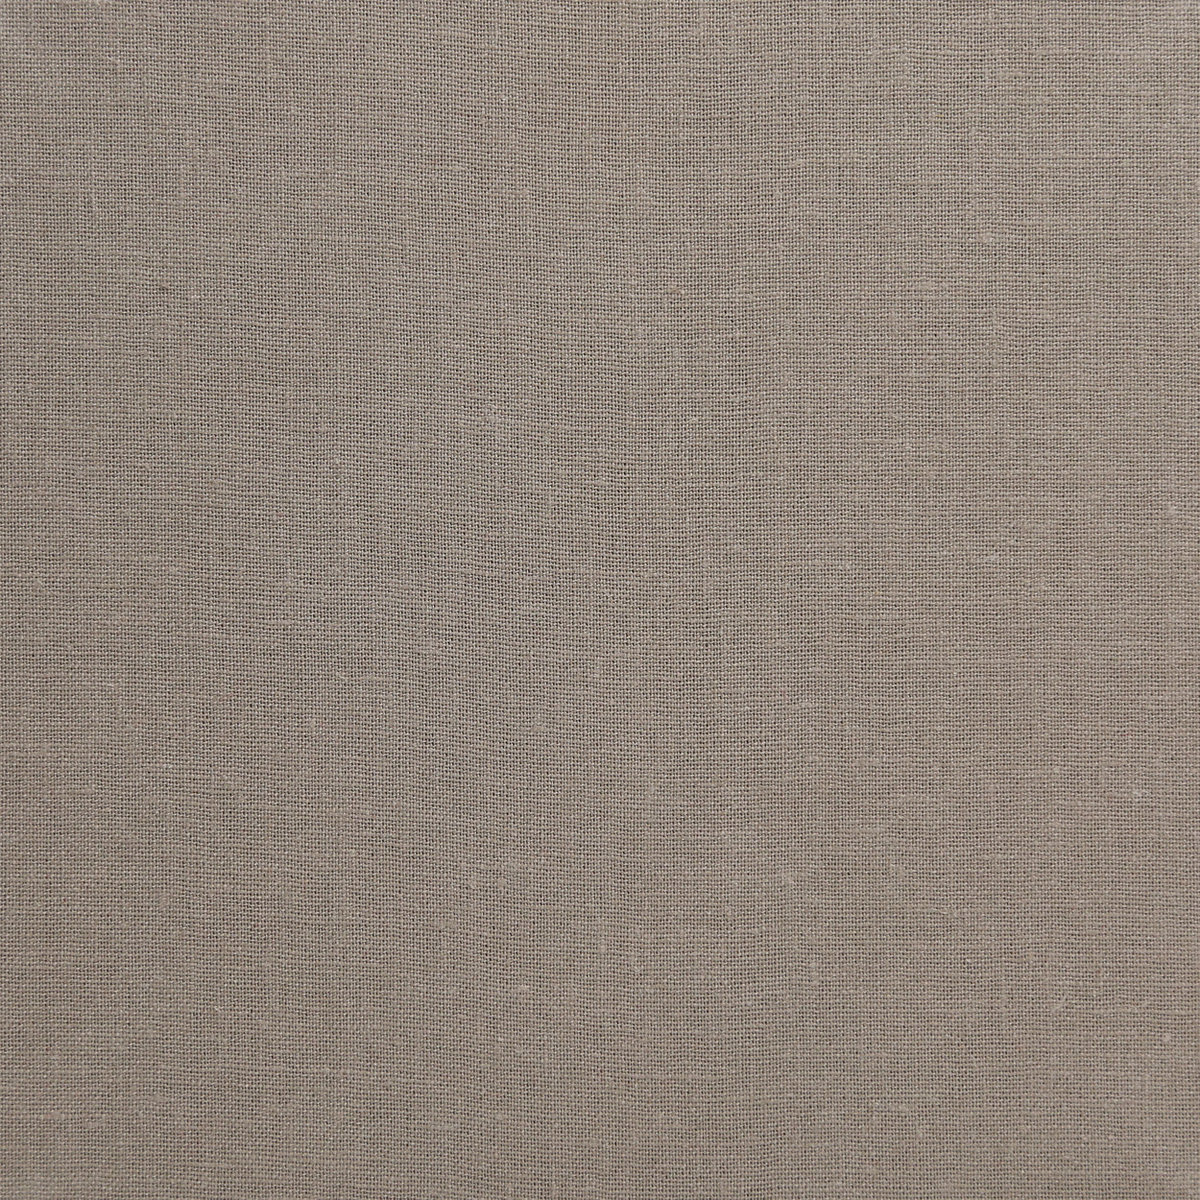 Linen-Taupe